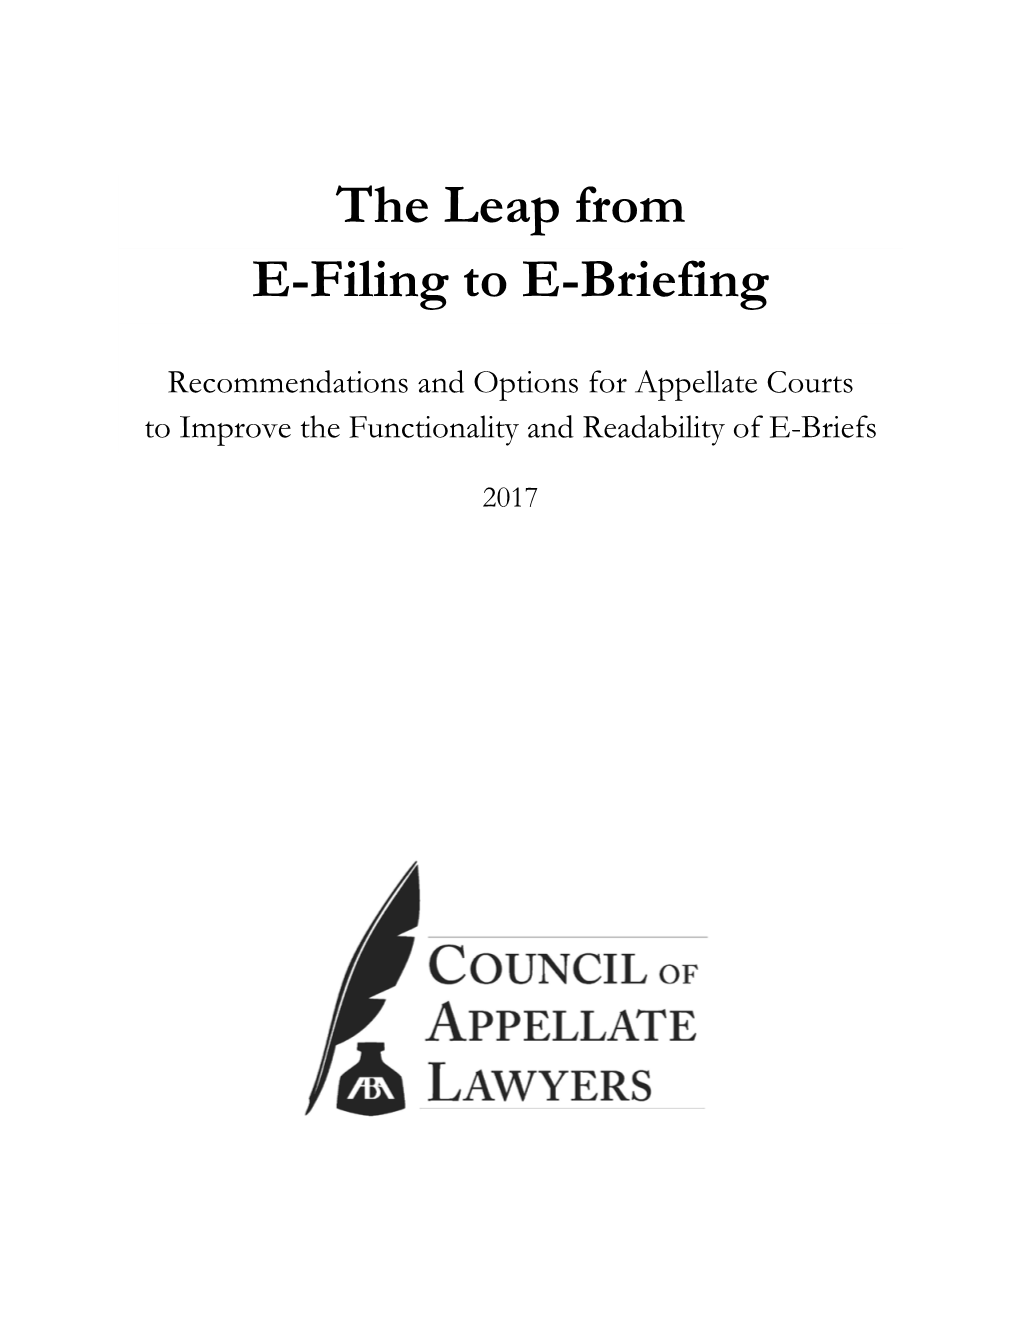 The Leap from E-Filing to E-Briefing